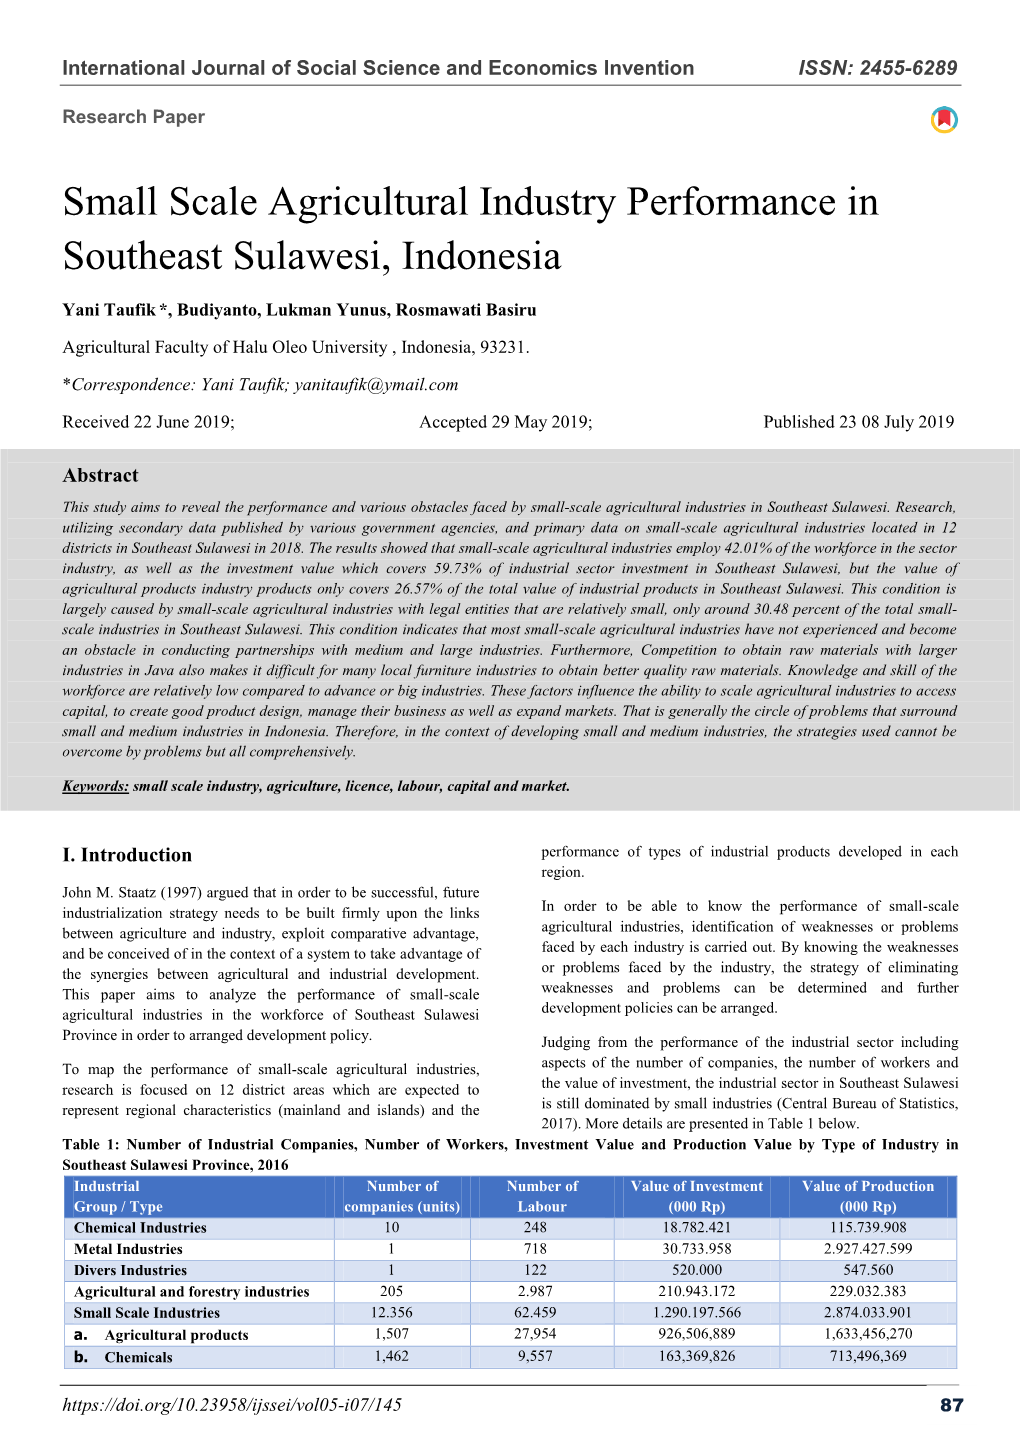 Small Scale Agricultural Industry Performance in Southeast Sulawesi, Indonesia